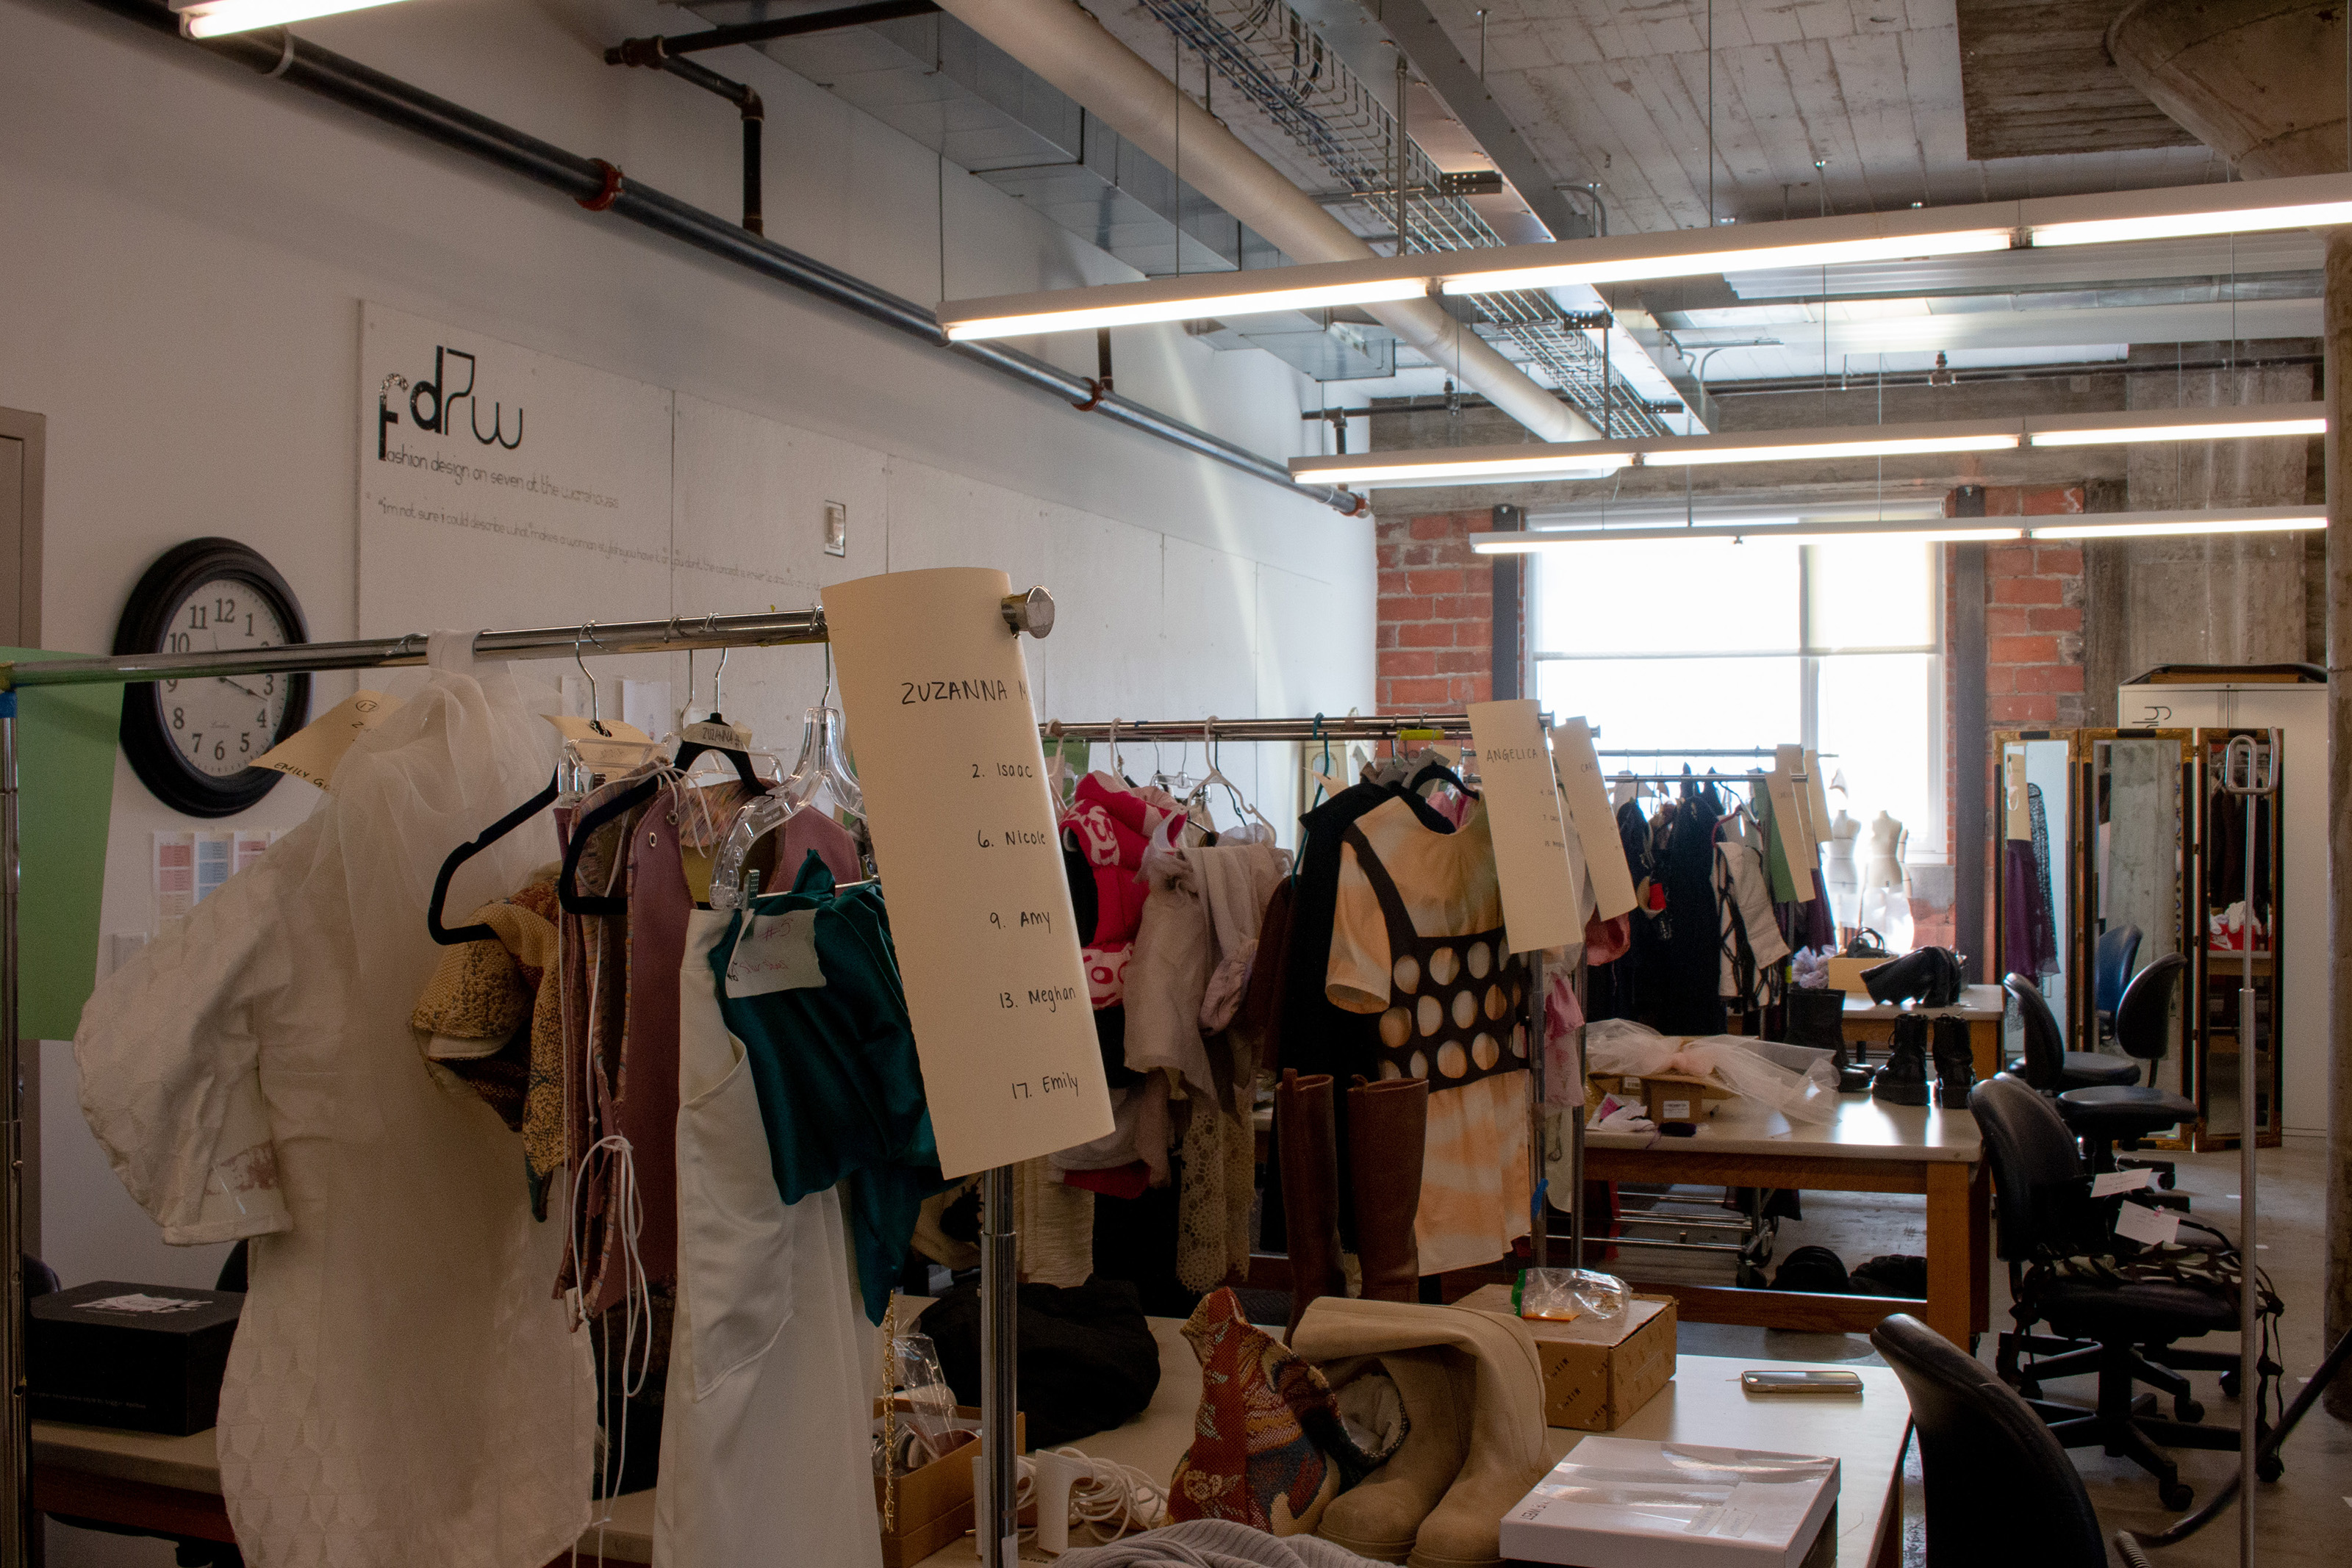 The stories behind the Senior Fashion Design Collective